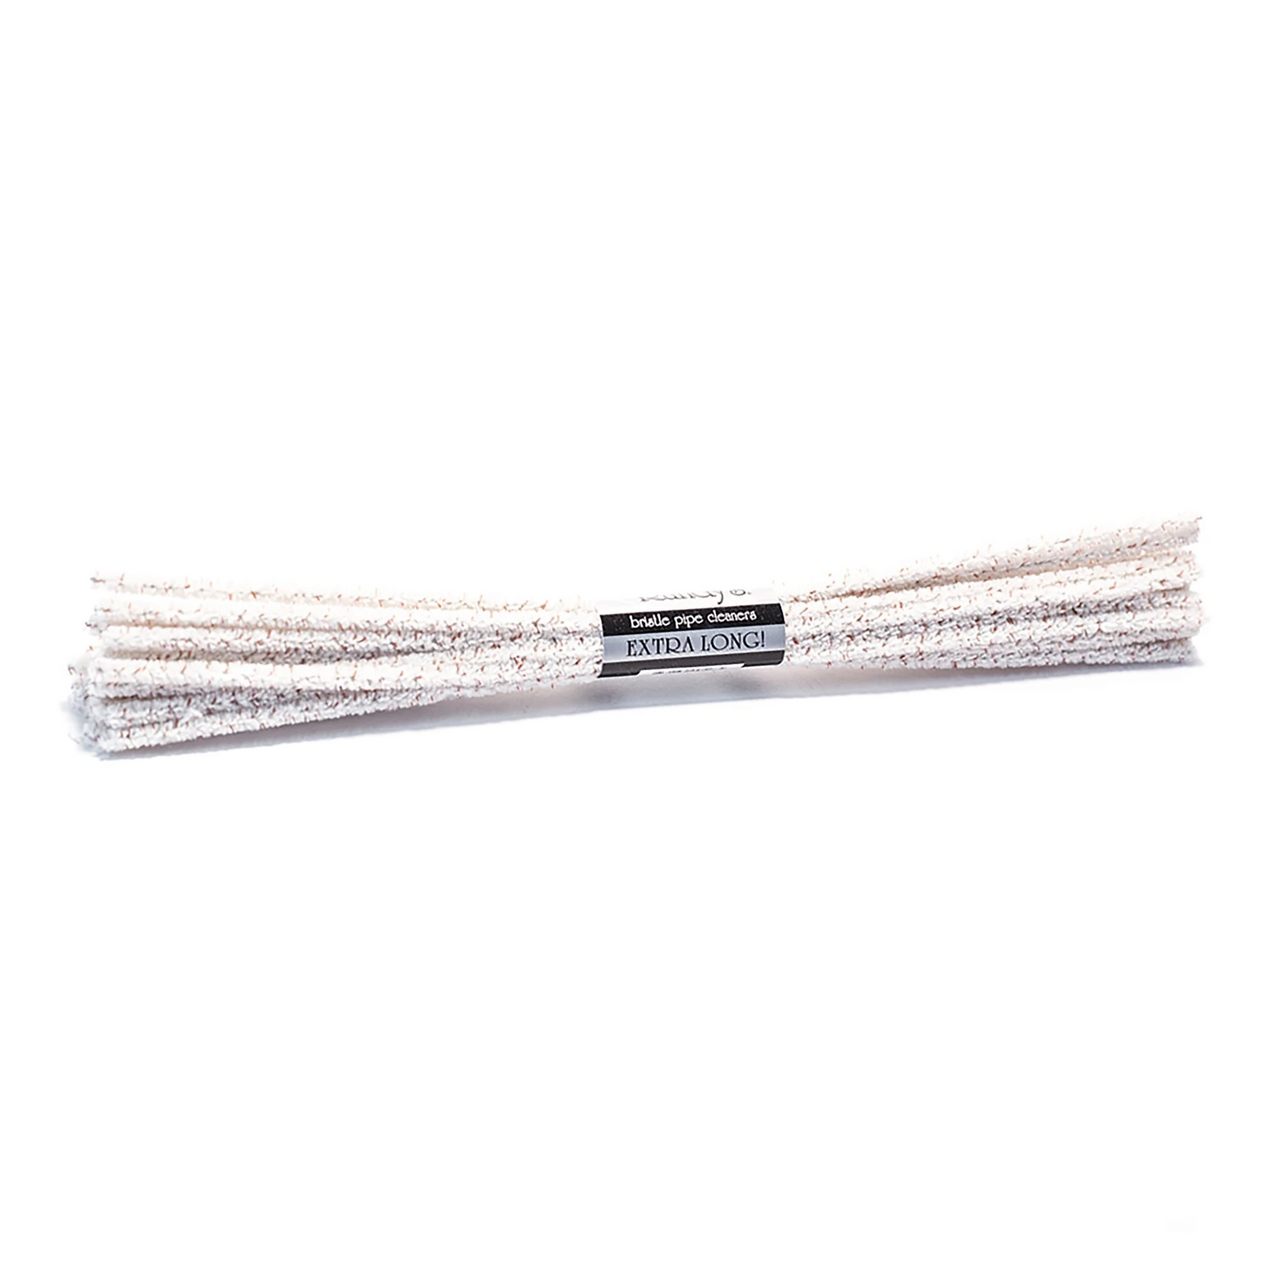 Randy's Extra Long Bristle Pipe Cleaners (10")